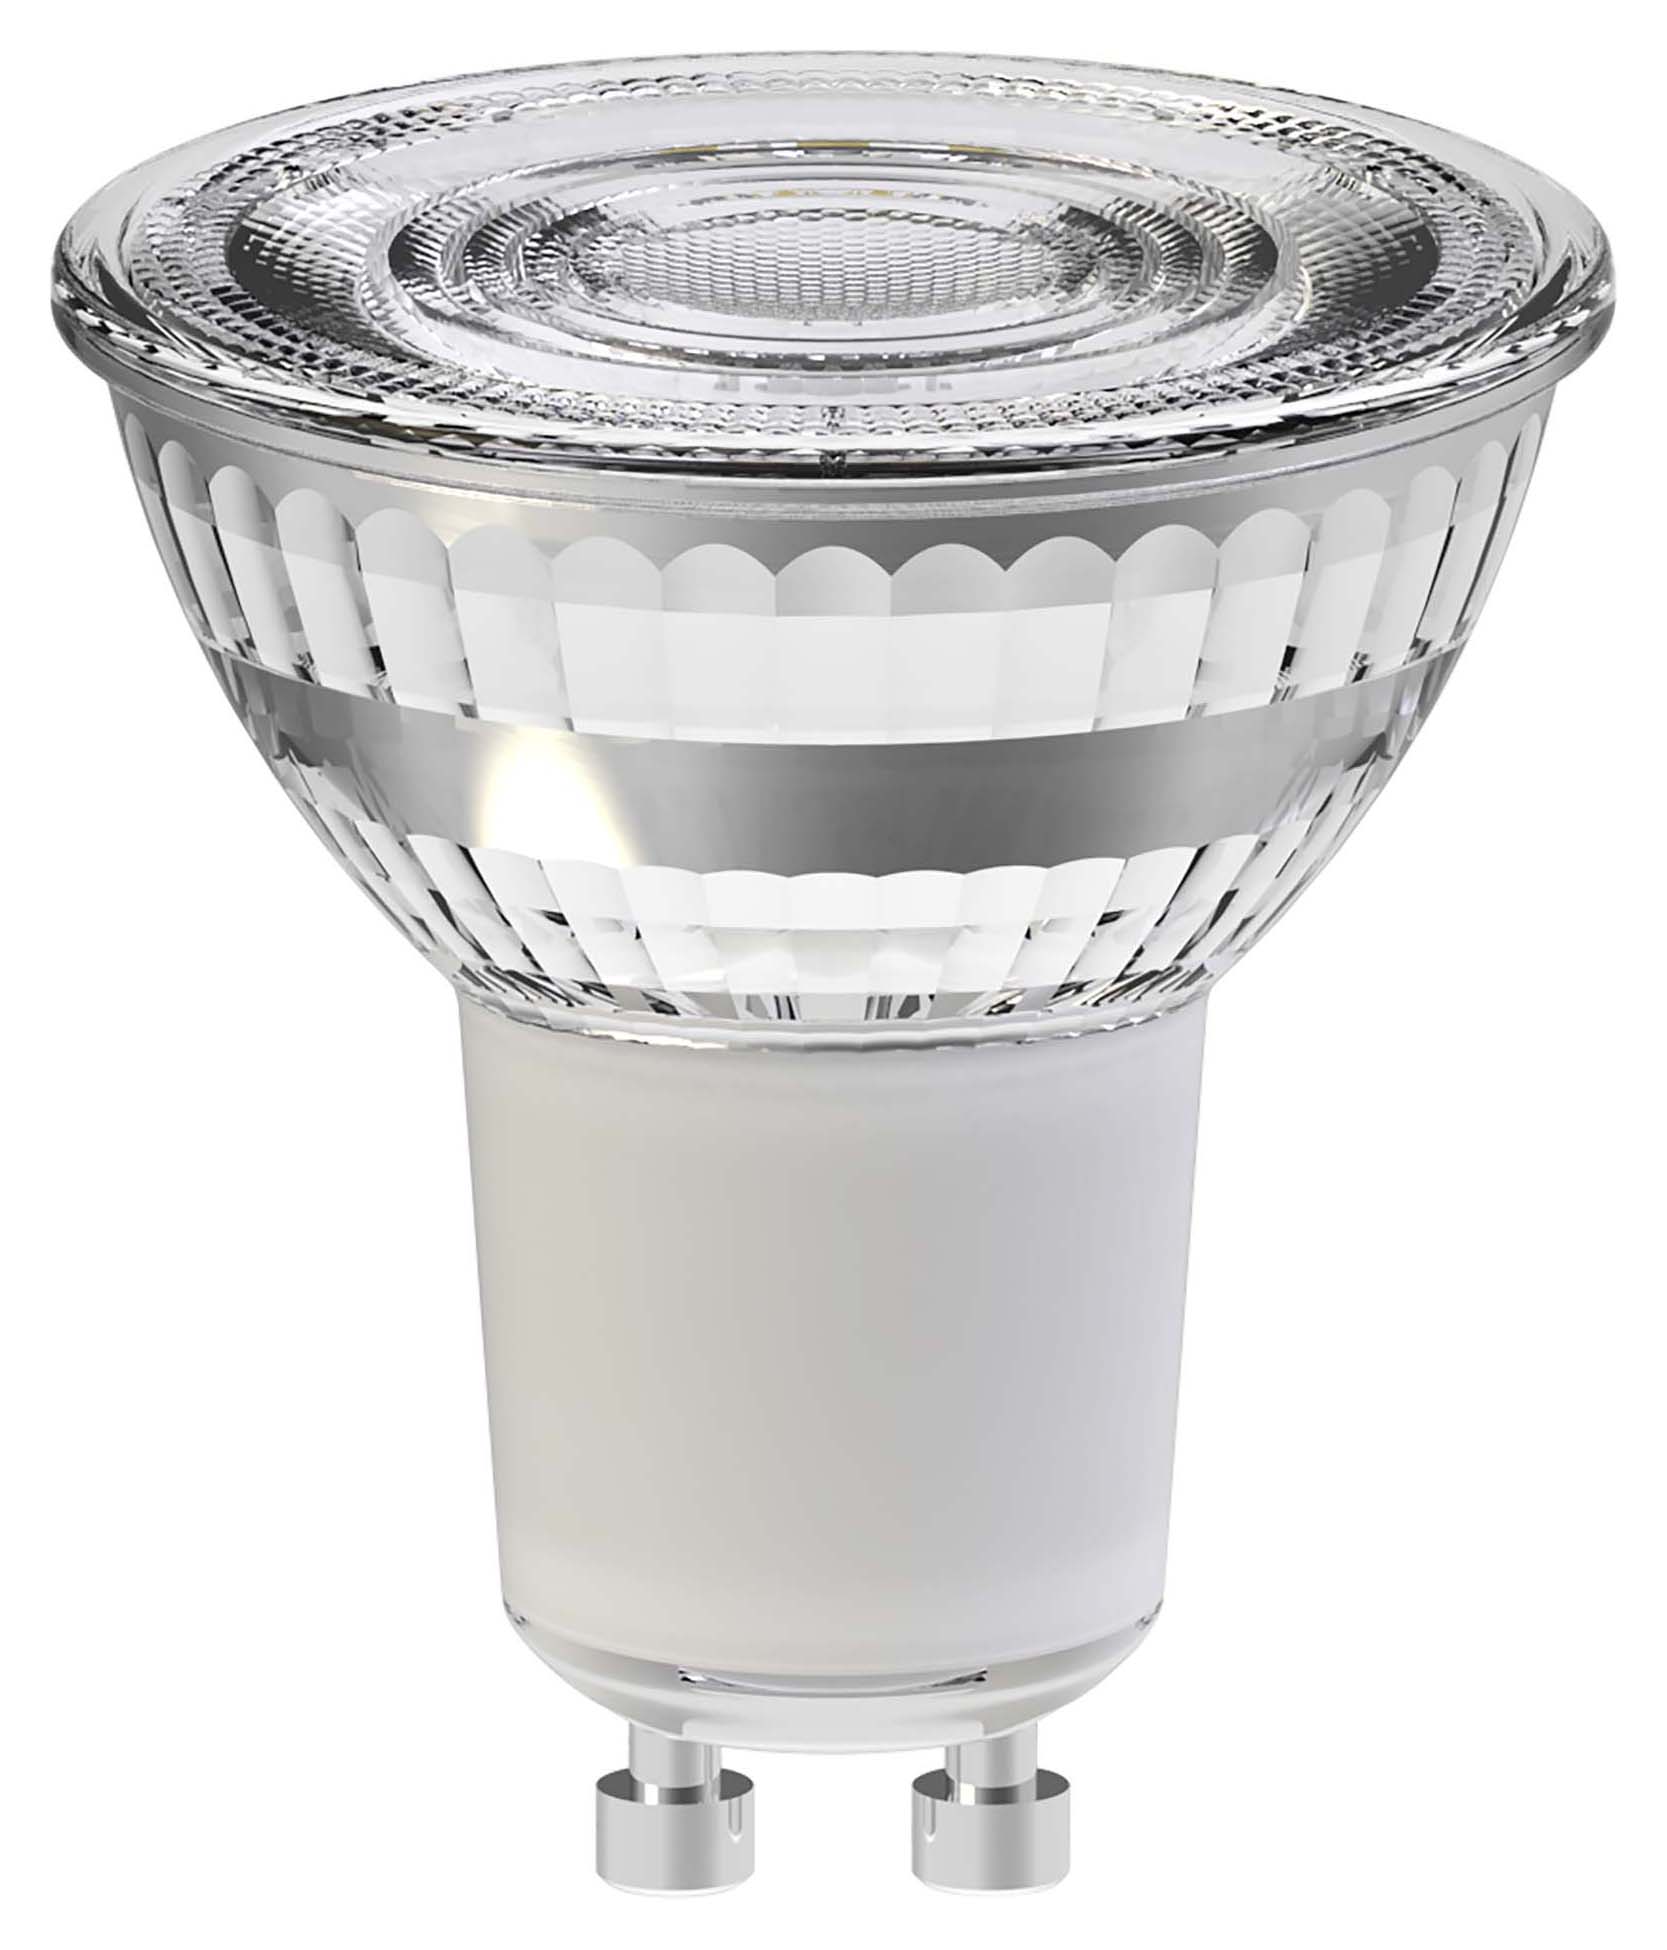 Wickes Dimmable LED GU10 4.2W Cool White Light Bulb - of 2 | Wickes.co.uk